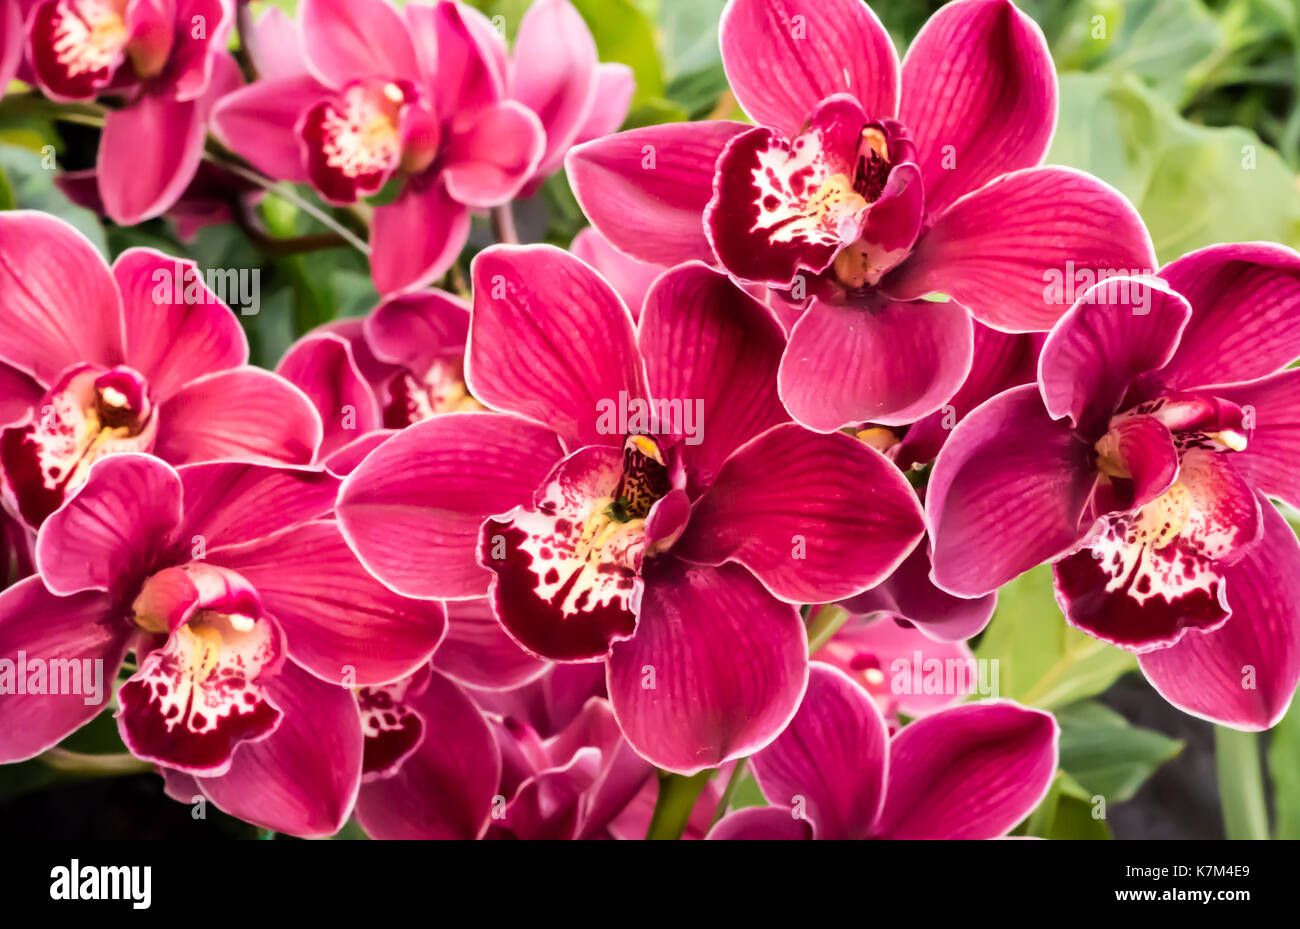 Red, pink and white orchid flower blossoms against green foliage Stock Photo